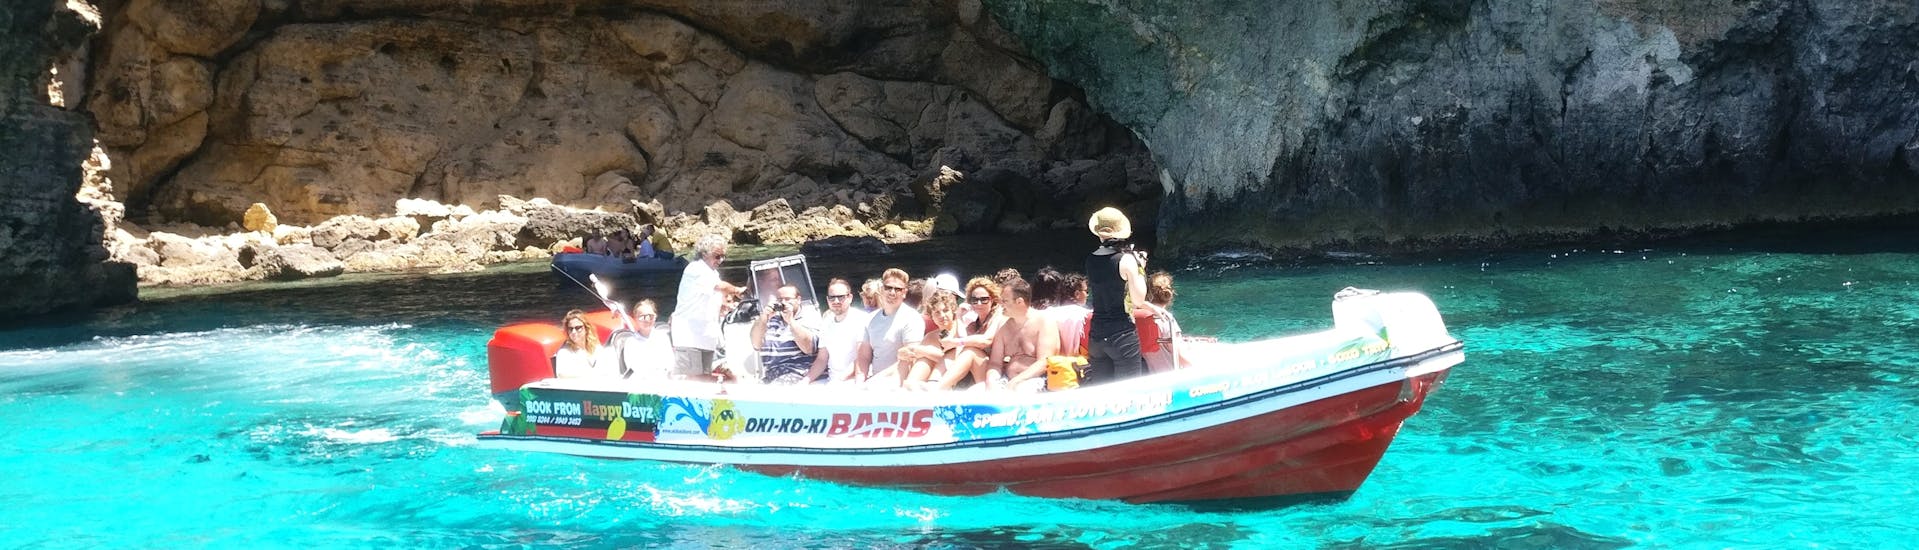 Passengers are enjoying the sun during the Speedboat Trip to Comino's Caves from St. Julian's.